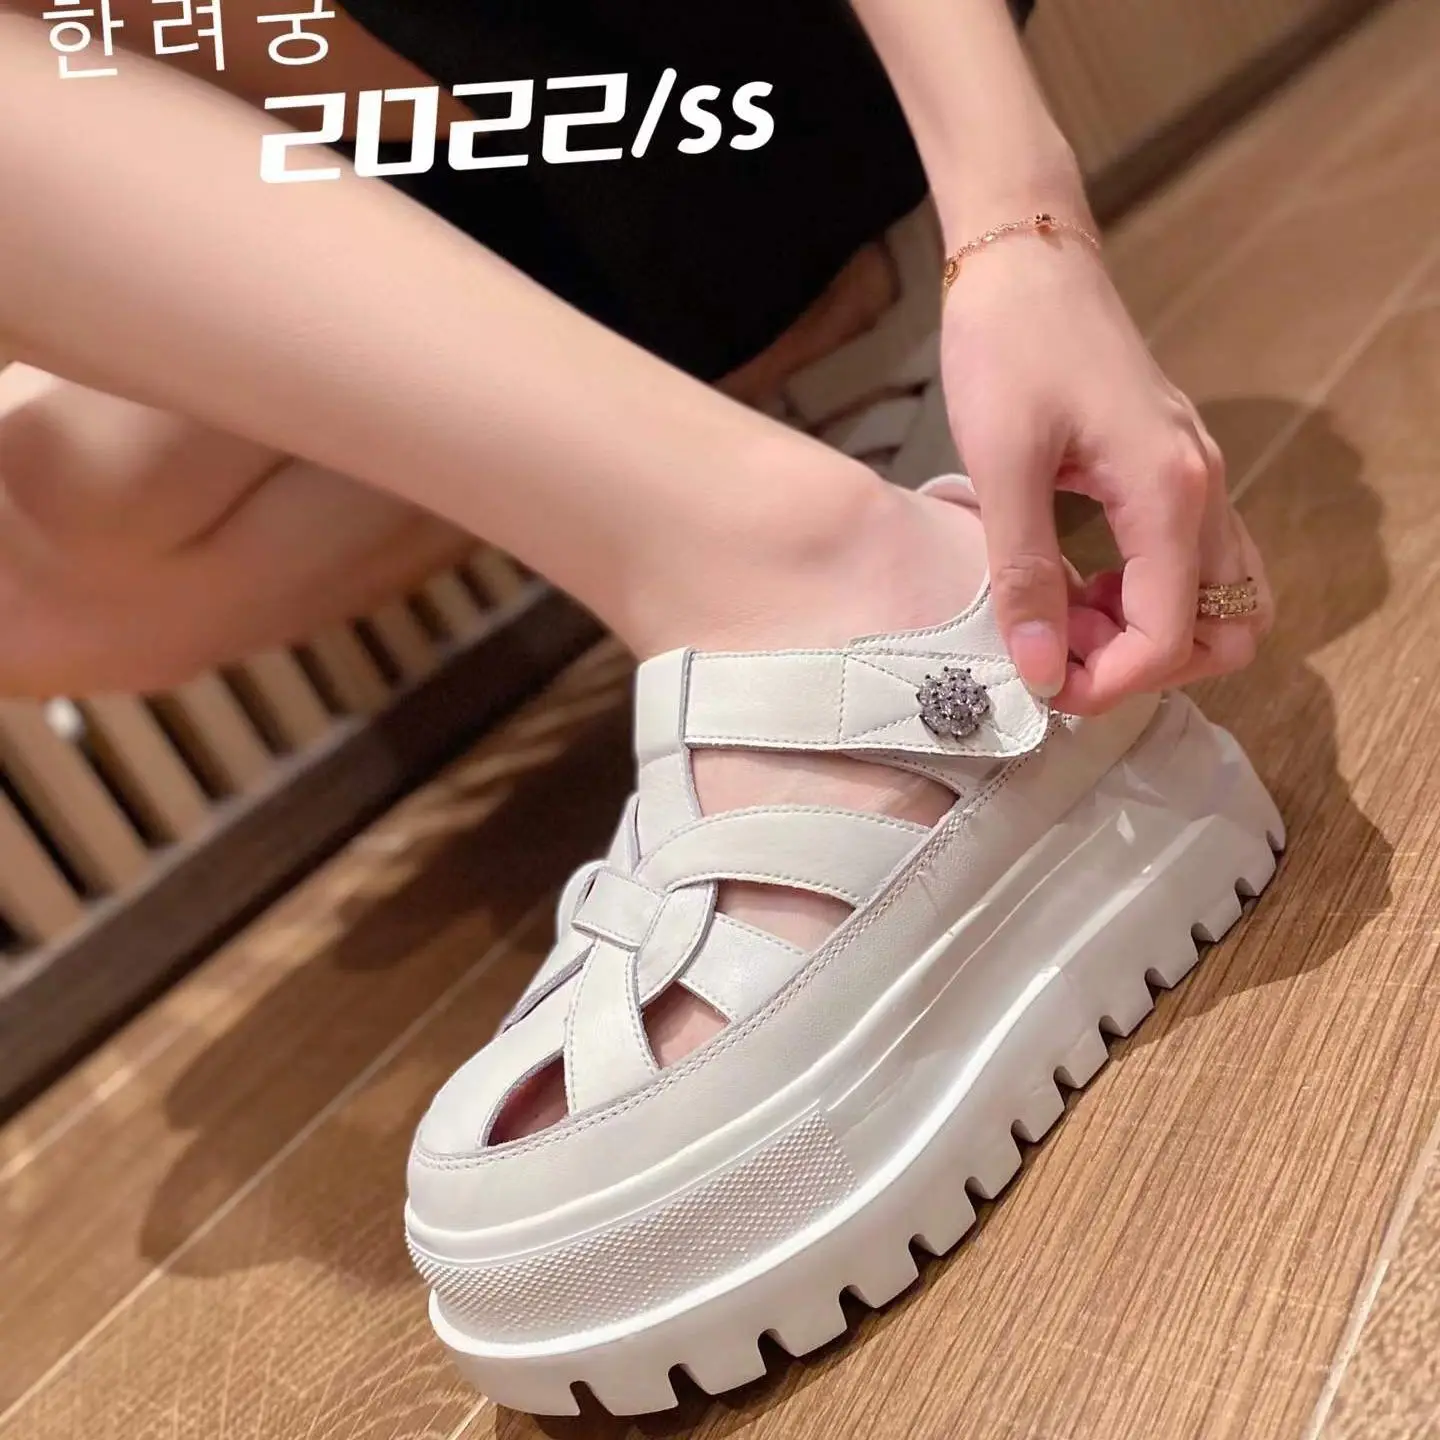 

Clogs Wedge Comfort Shoes For Women Roman Sandals Summer Casual Shoes All-Match High Heels Platform Gladiator Fashion Girls 2022